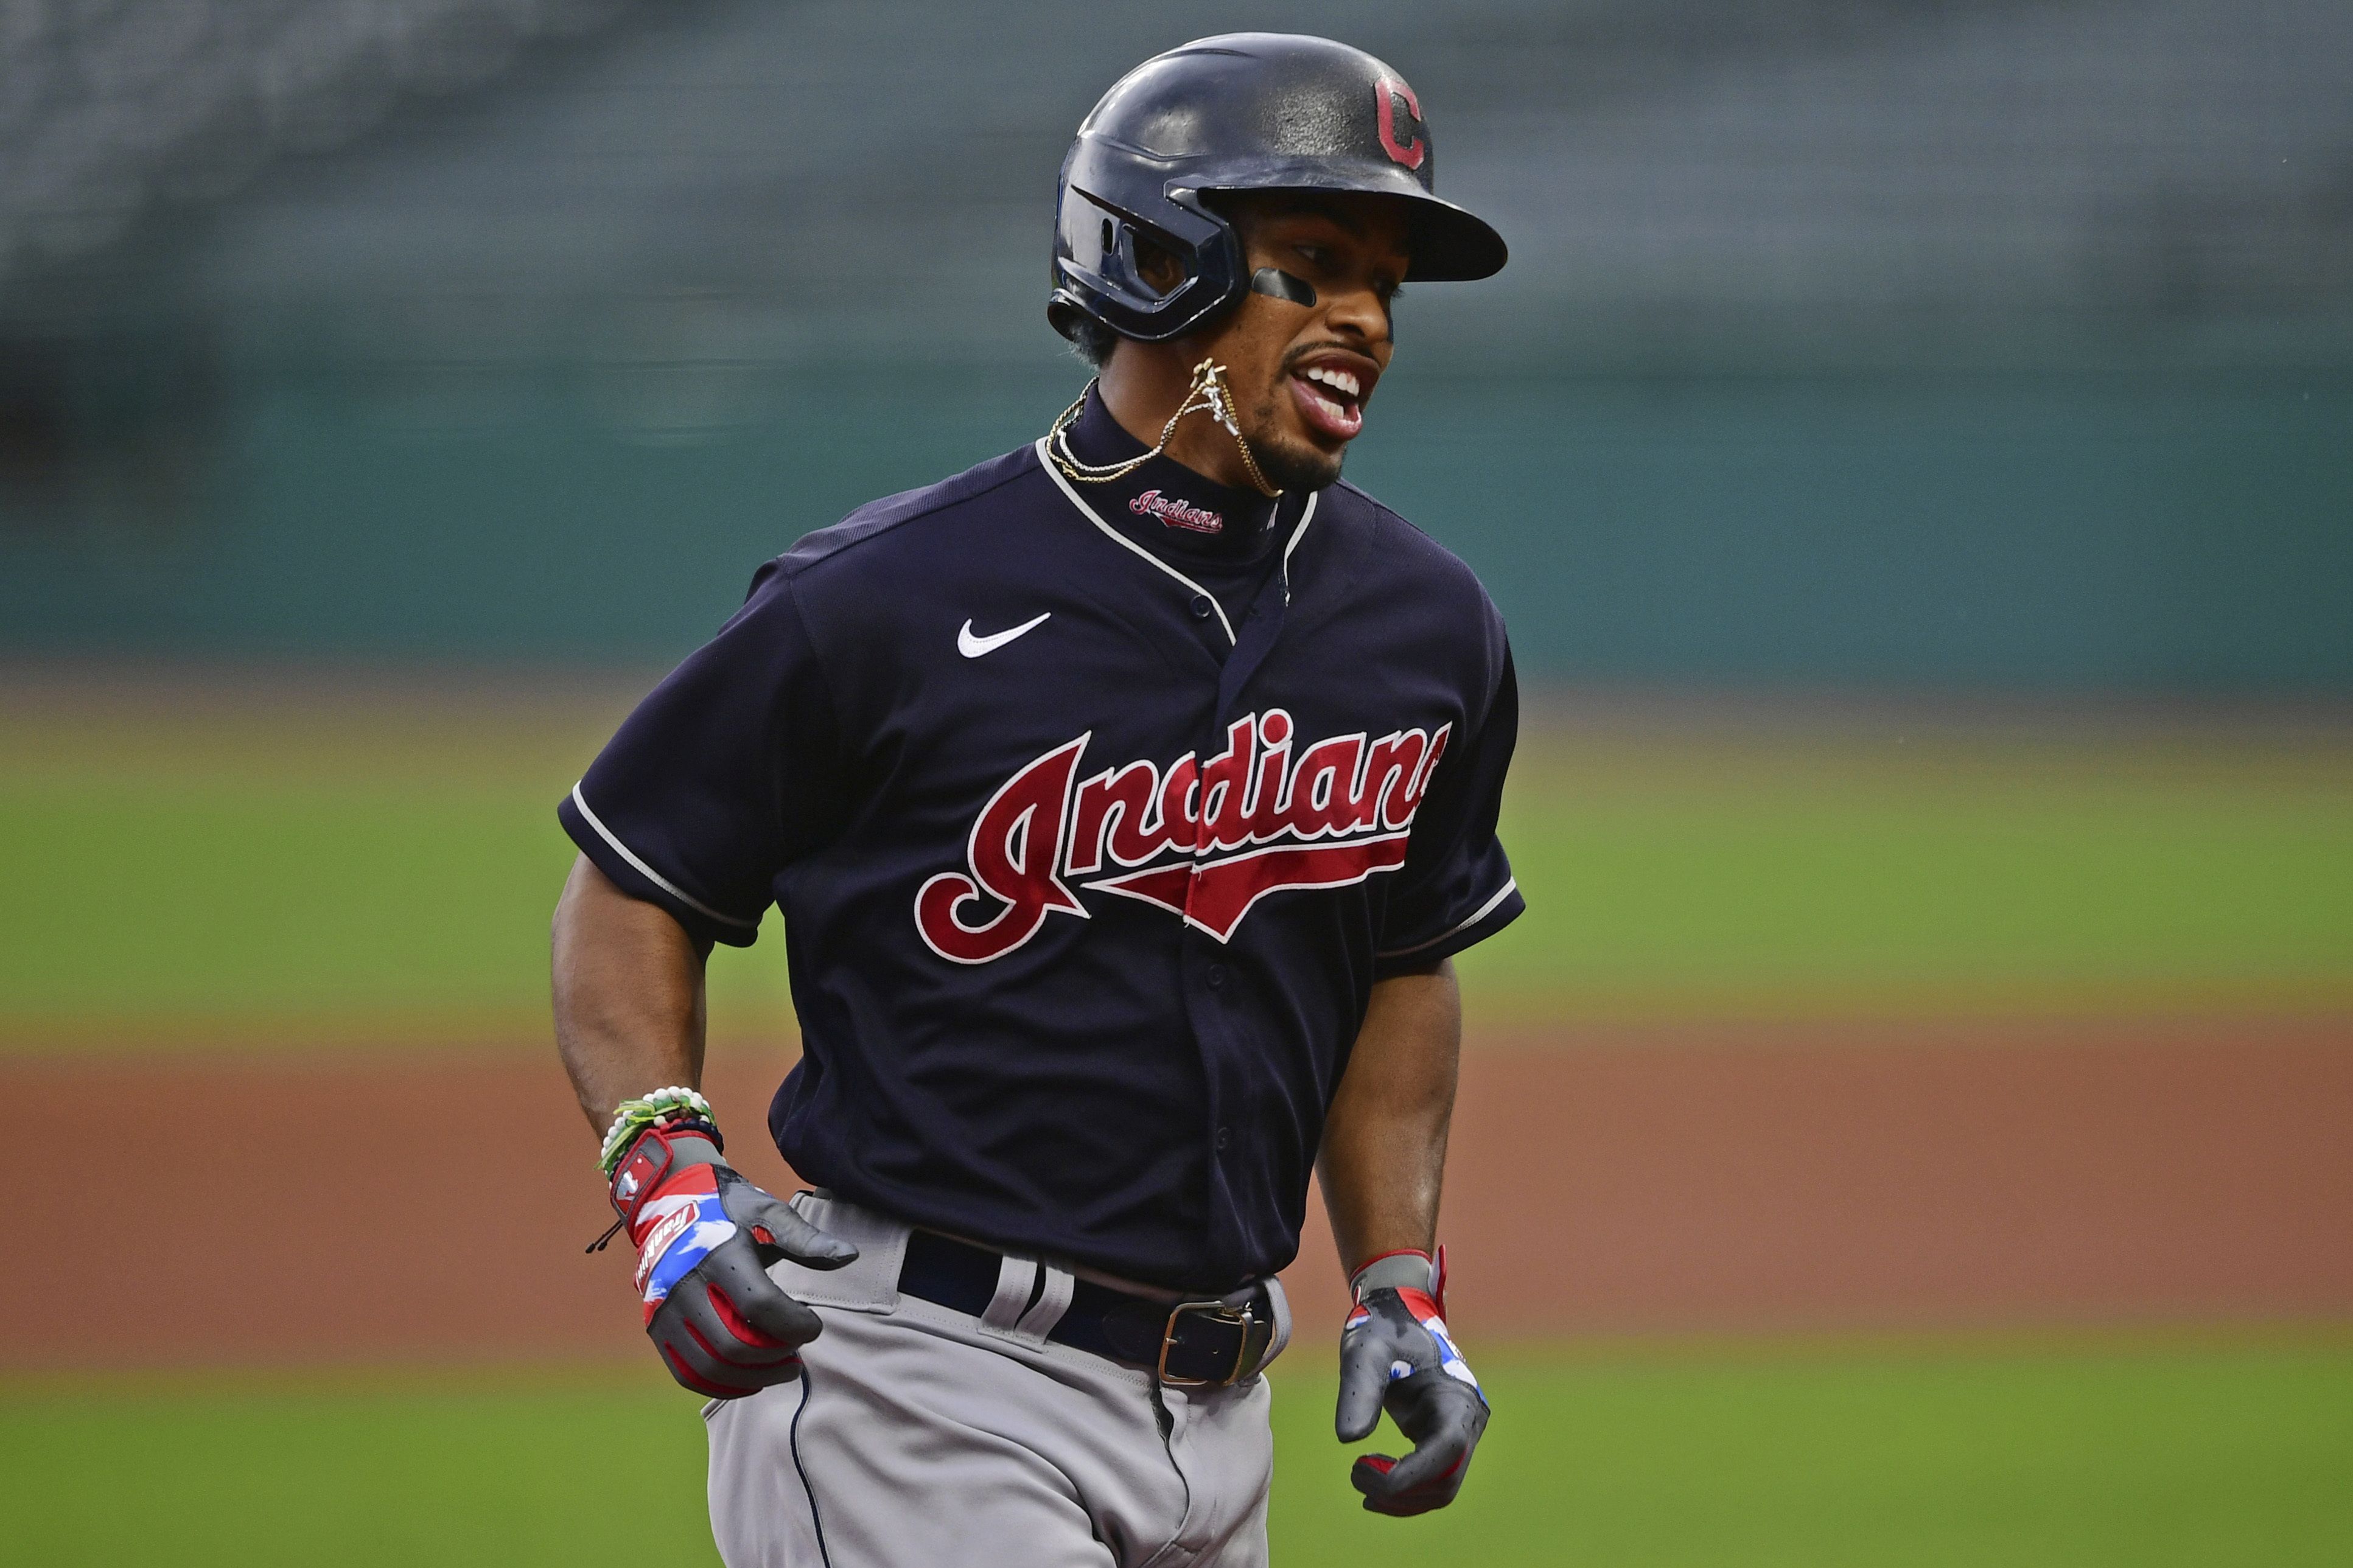 Cleveland Indians will not completely drop Chief Wahoo but will